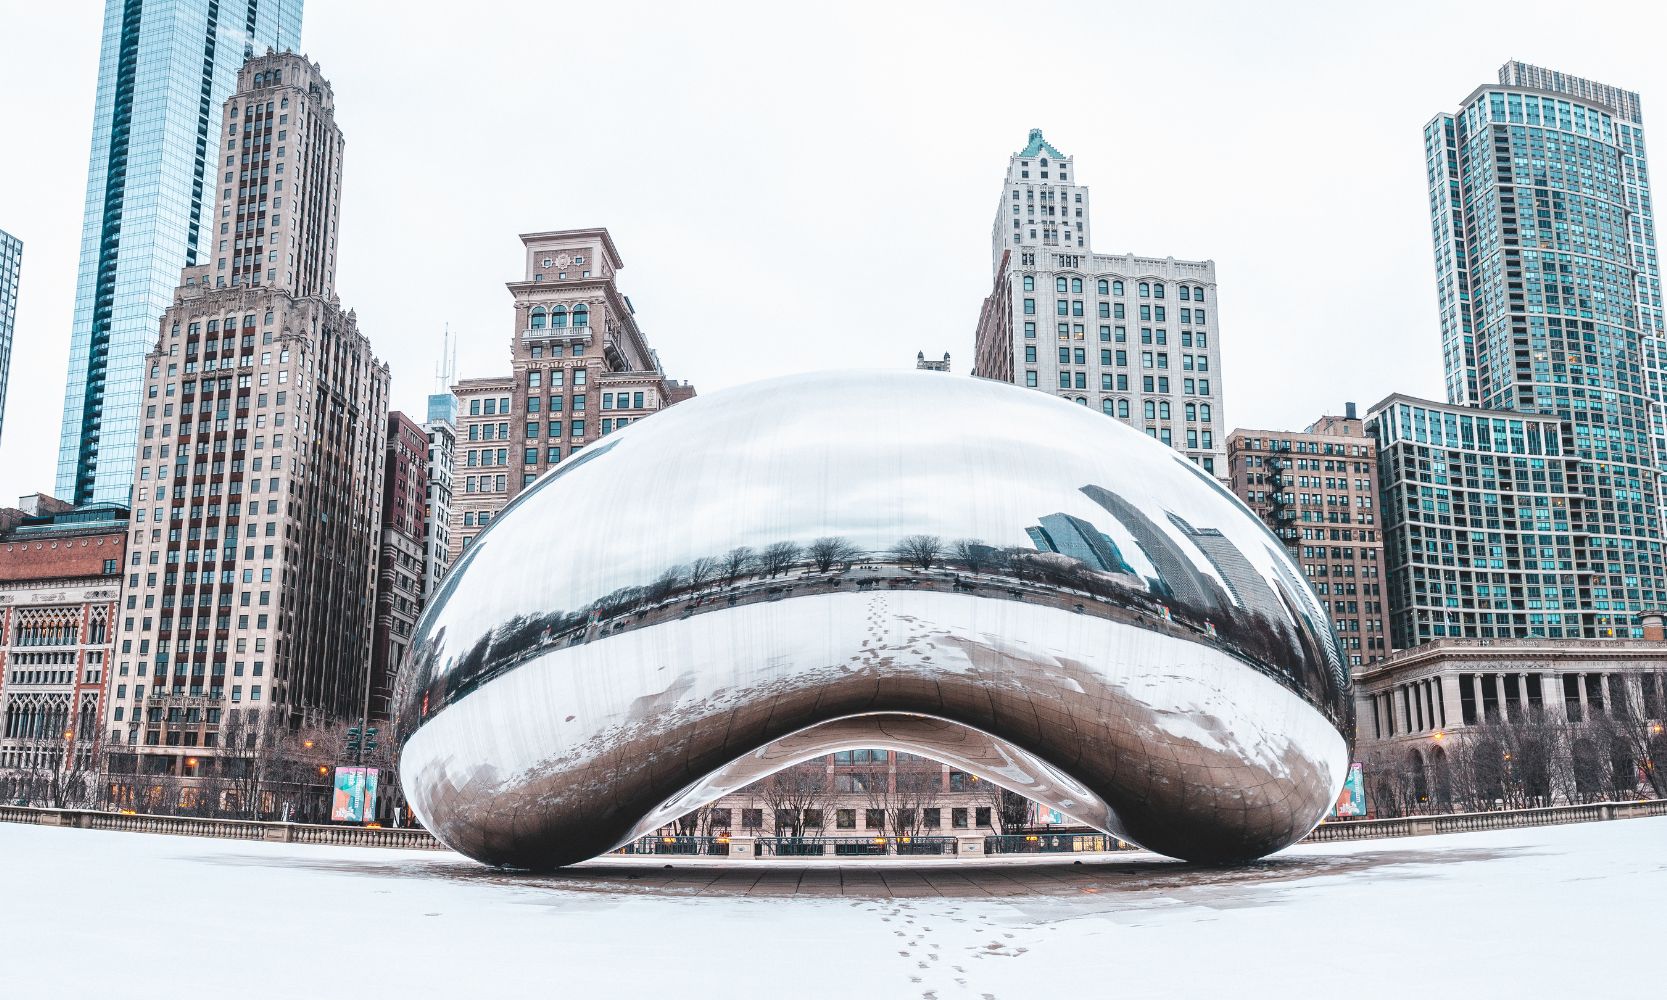 Image of "the Bean" in Chicago with snow on the ground